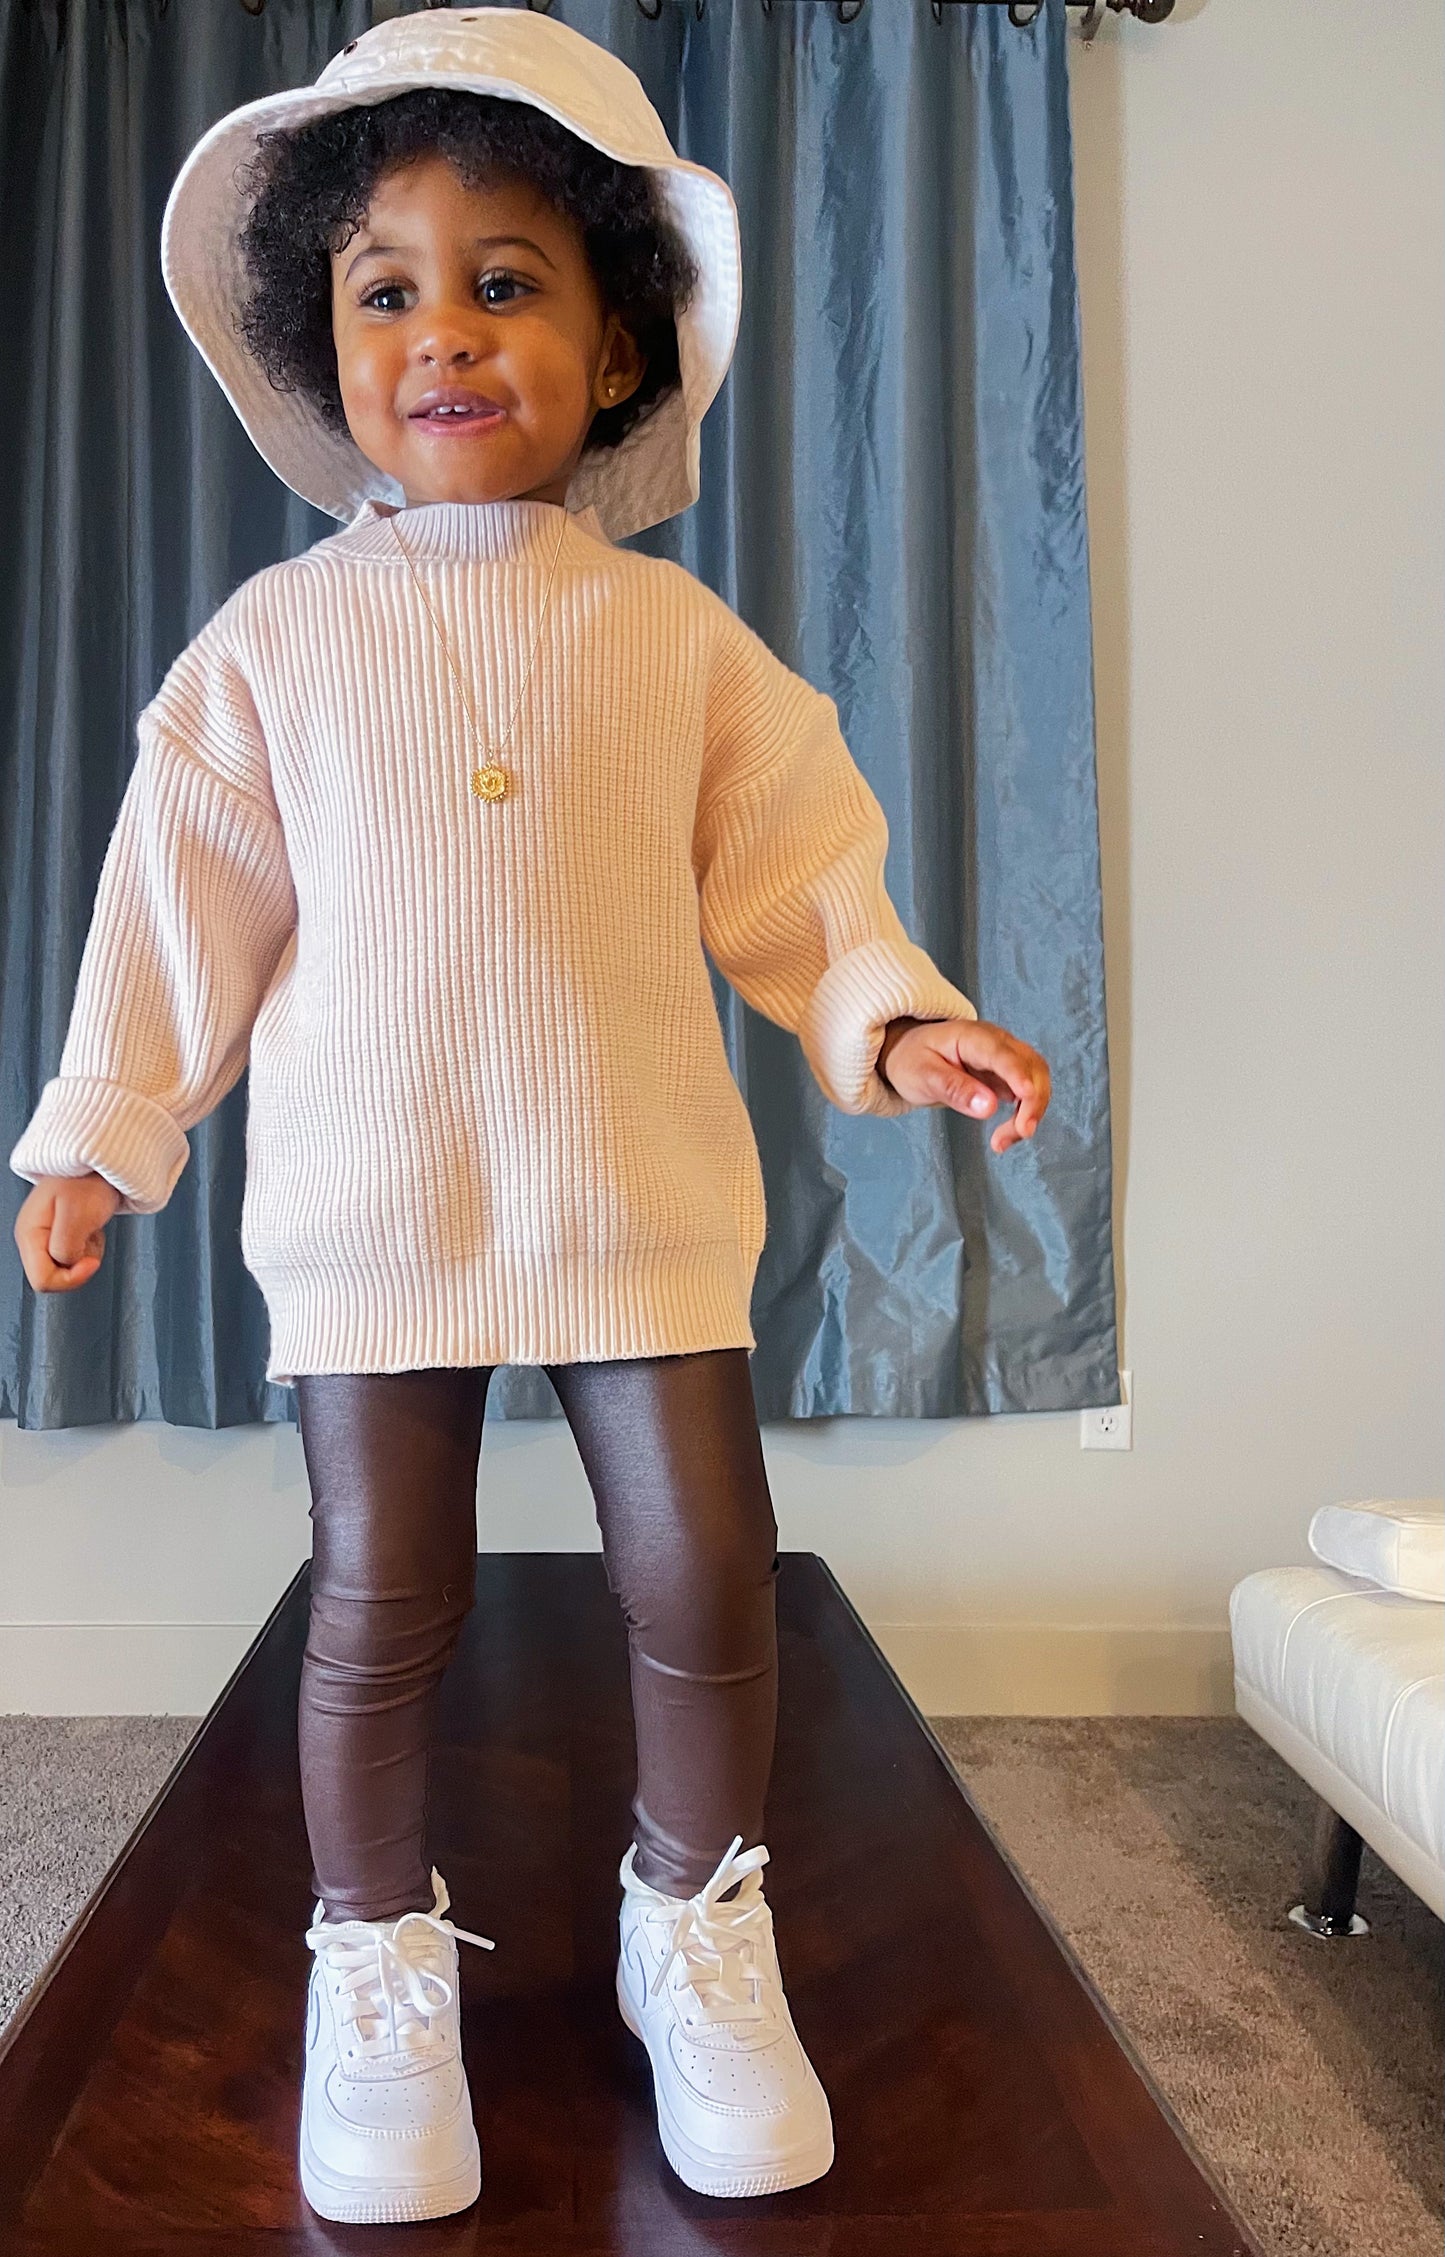 The Perfect Leggings in Chocolate Brown | Toddler Girl Faux Leather Leggings